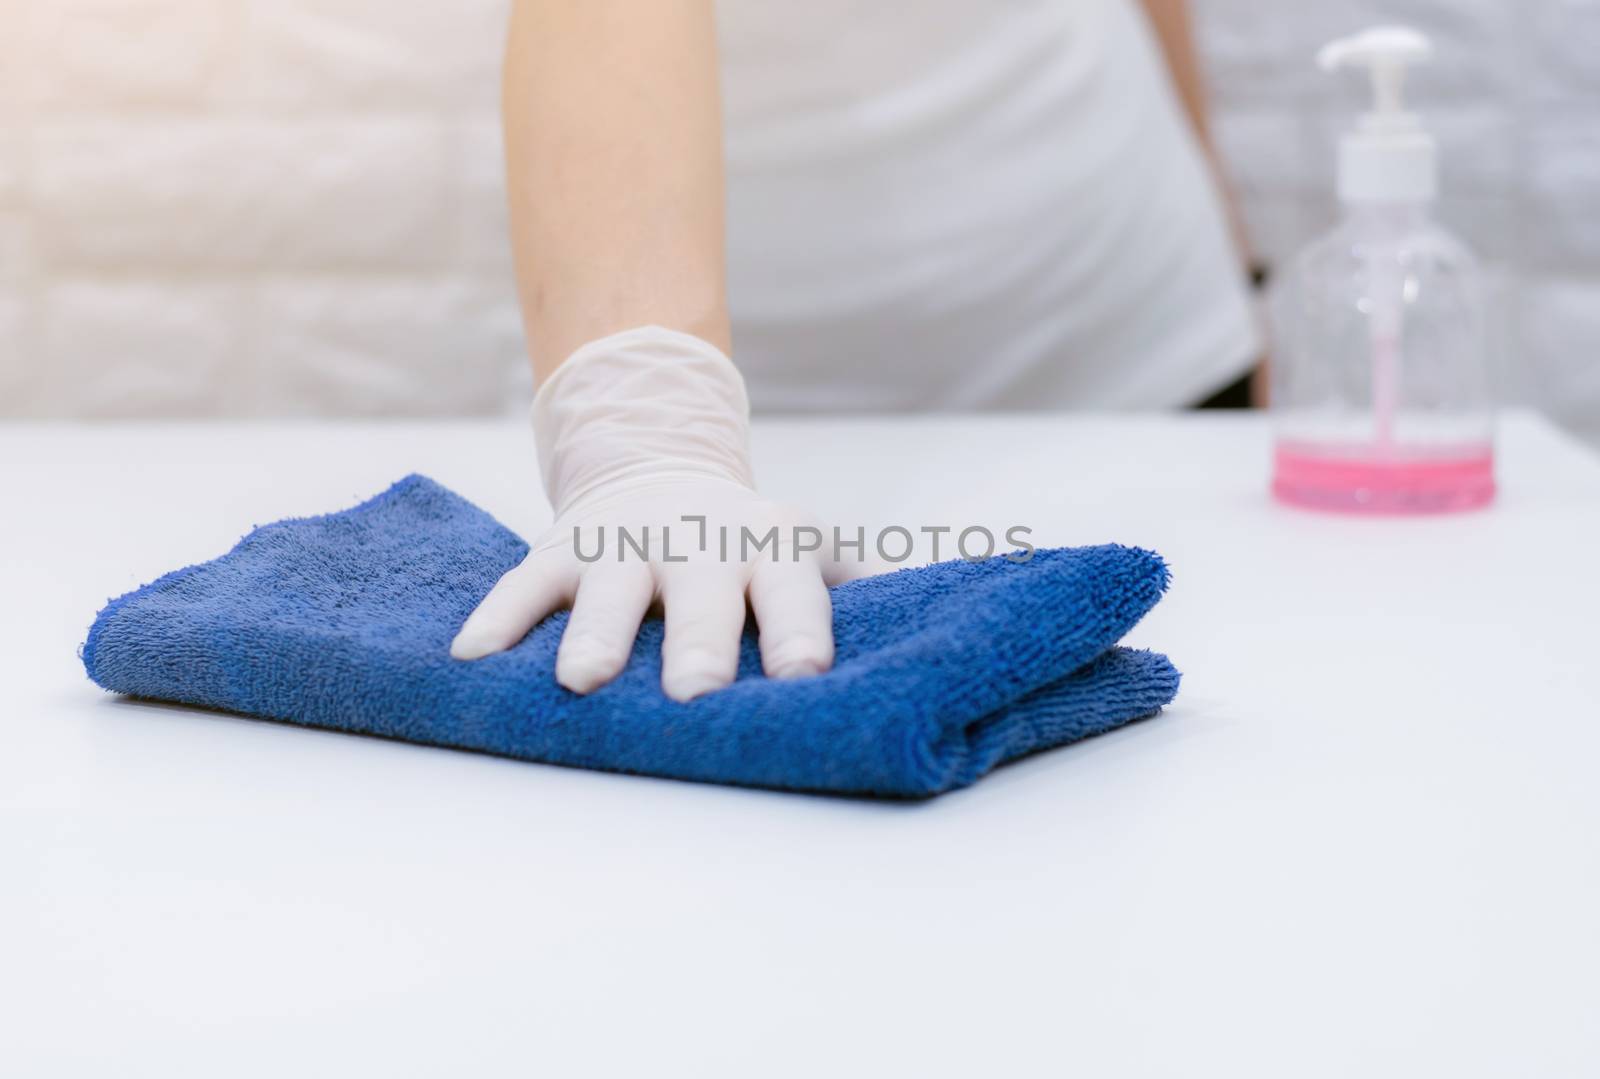 Women wearing gloves to wipe the table to clean the dust by sompongtom